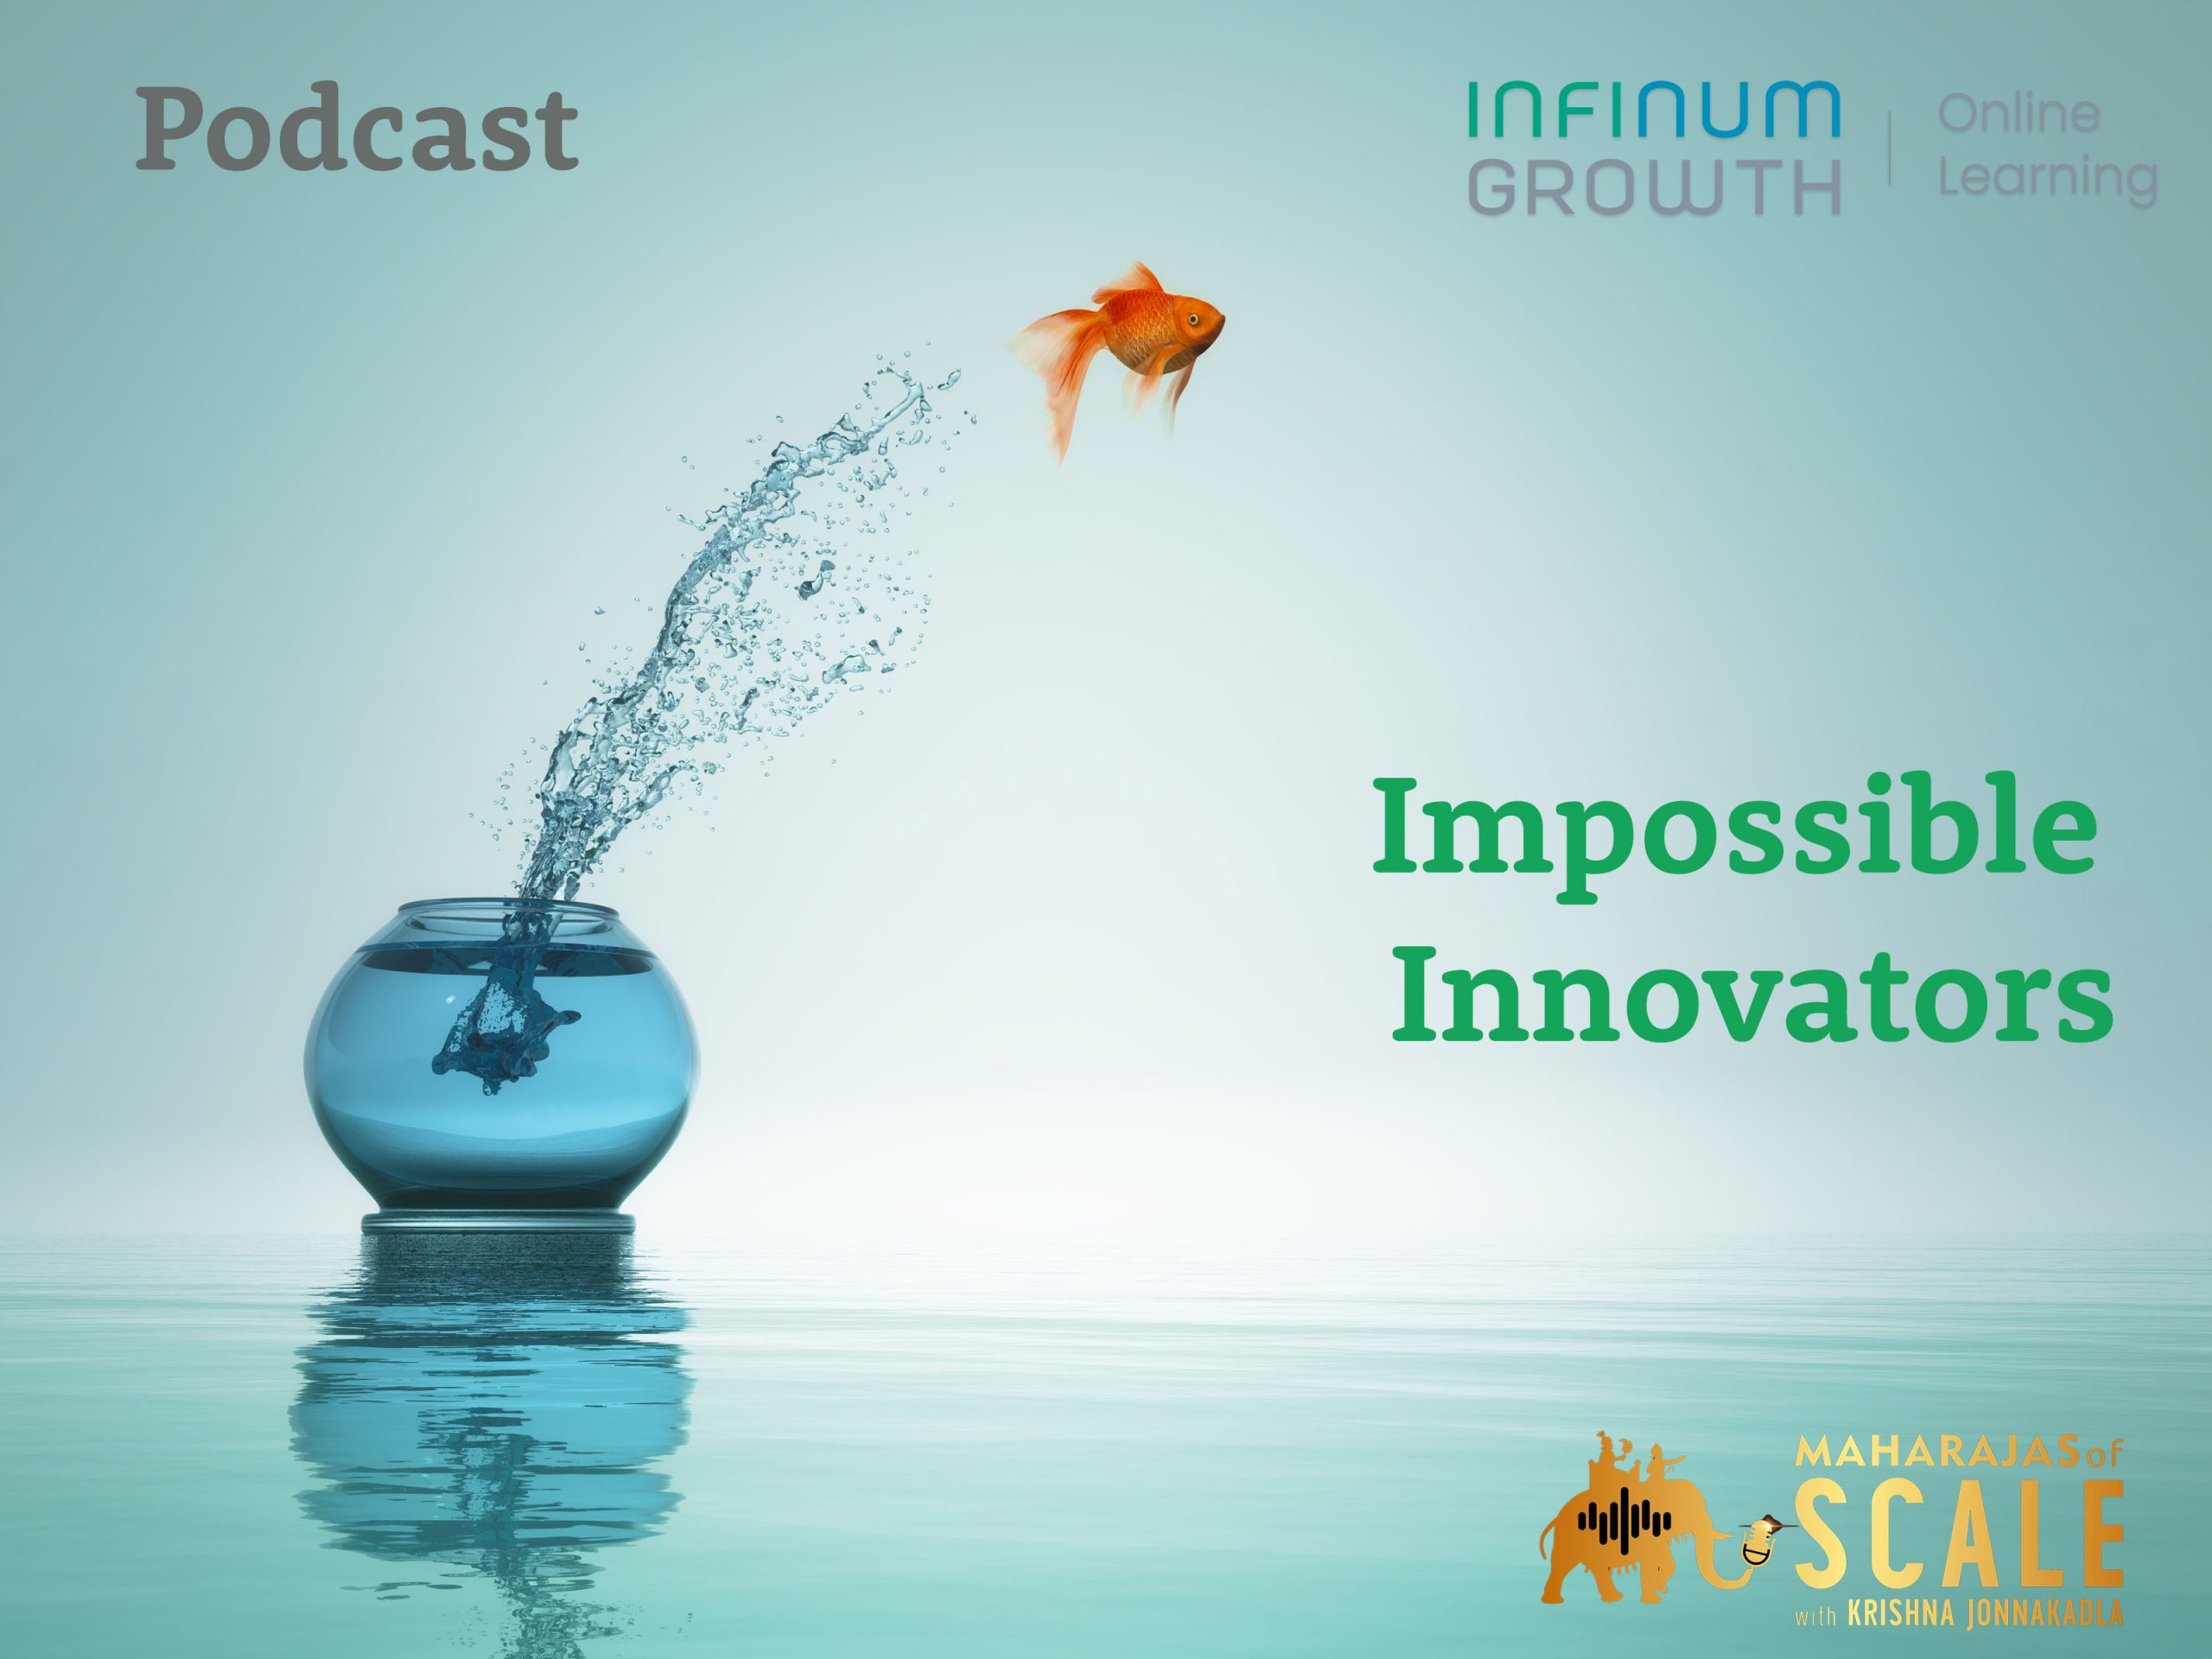 Podcast – How to be an Impossible Innovator